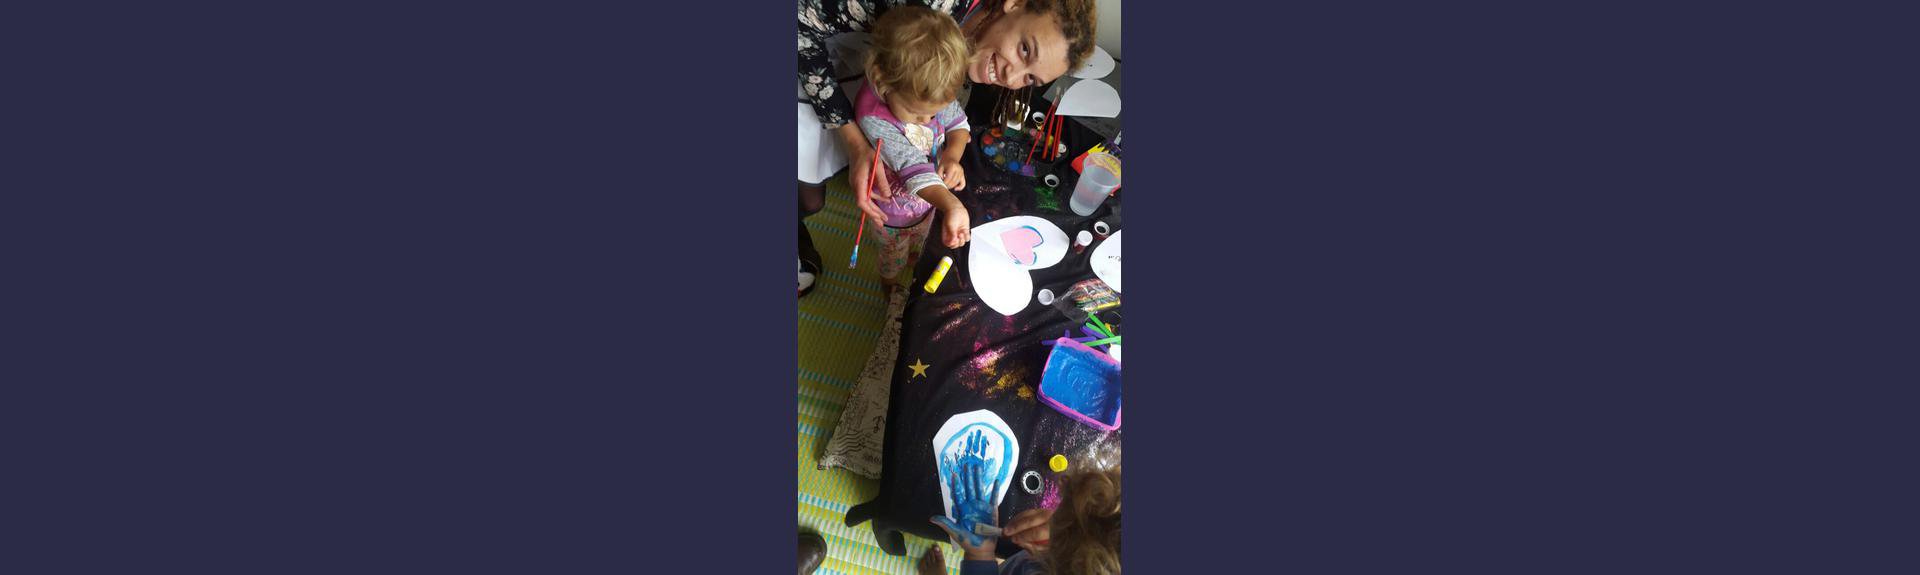 FUNKY Kidz Messy Play Tableview & Parklands